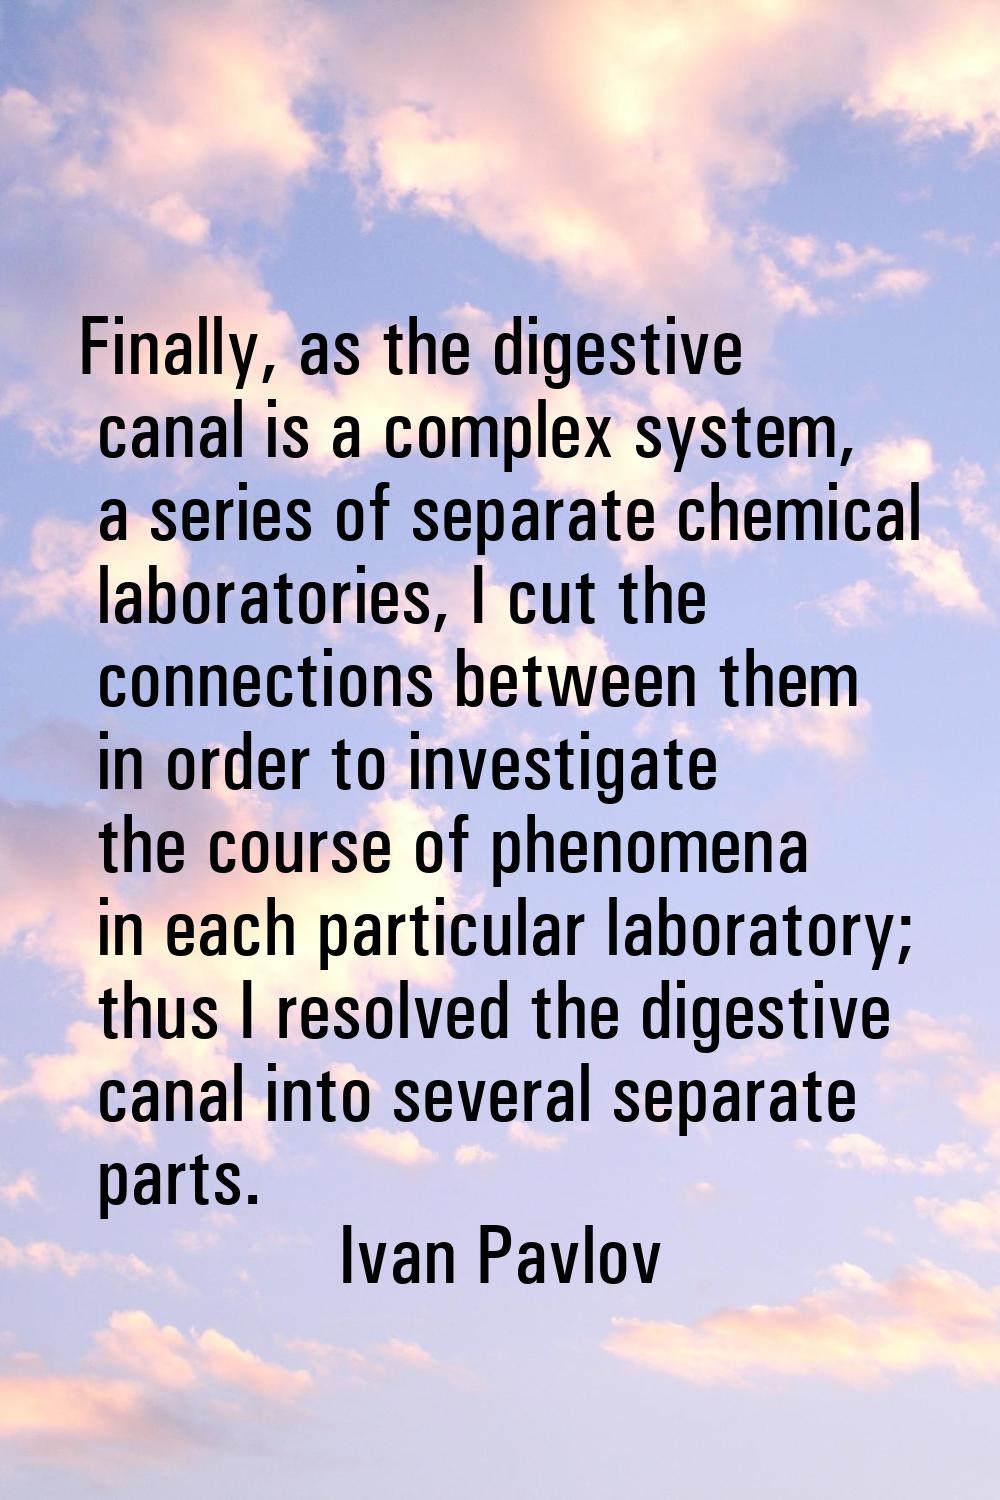 Finally, as the digestive canal is a complex system, a series of separate chemical laboratories, I 